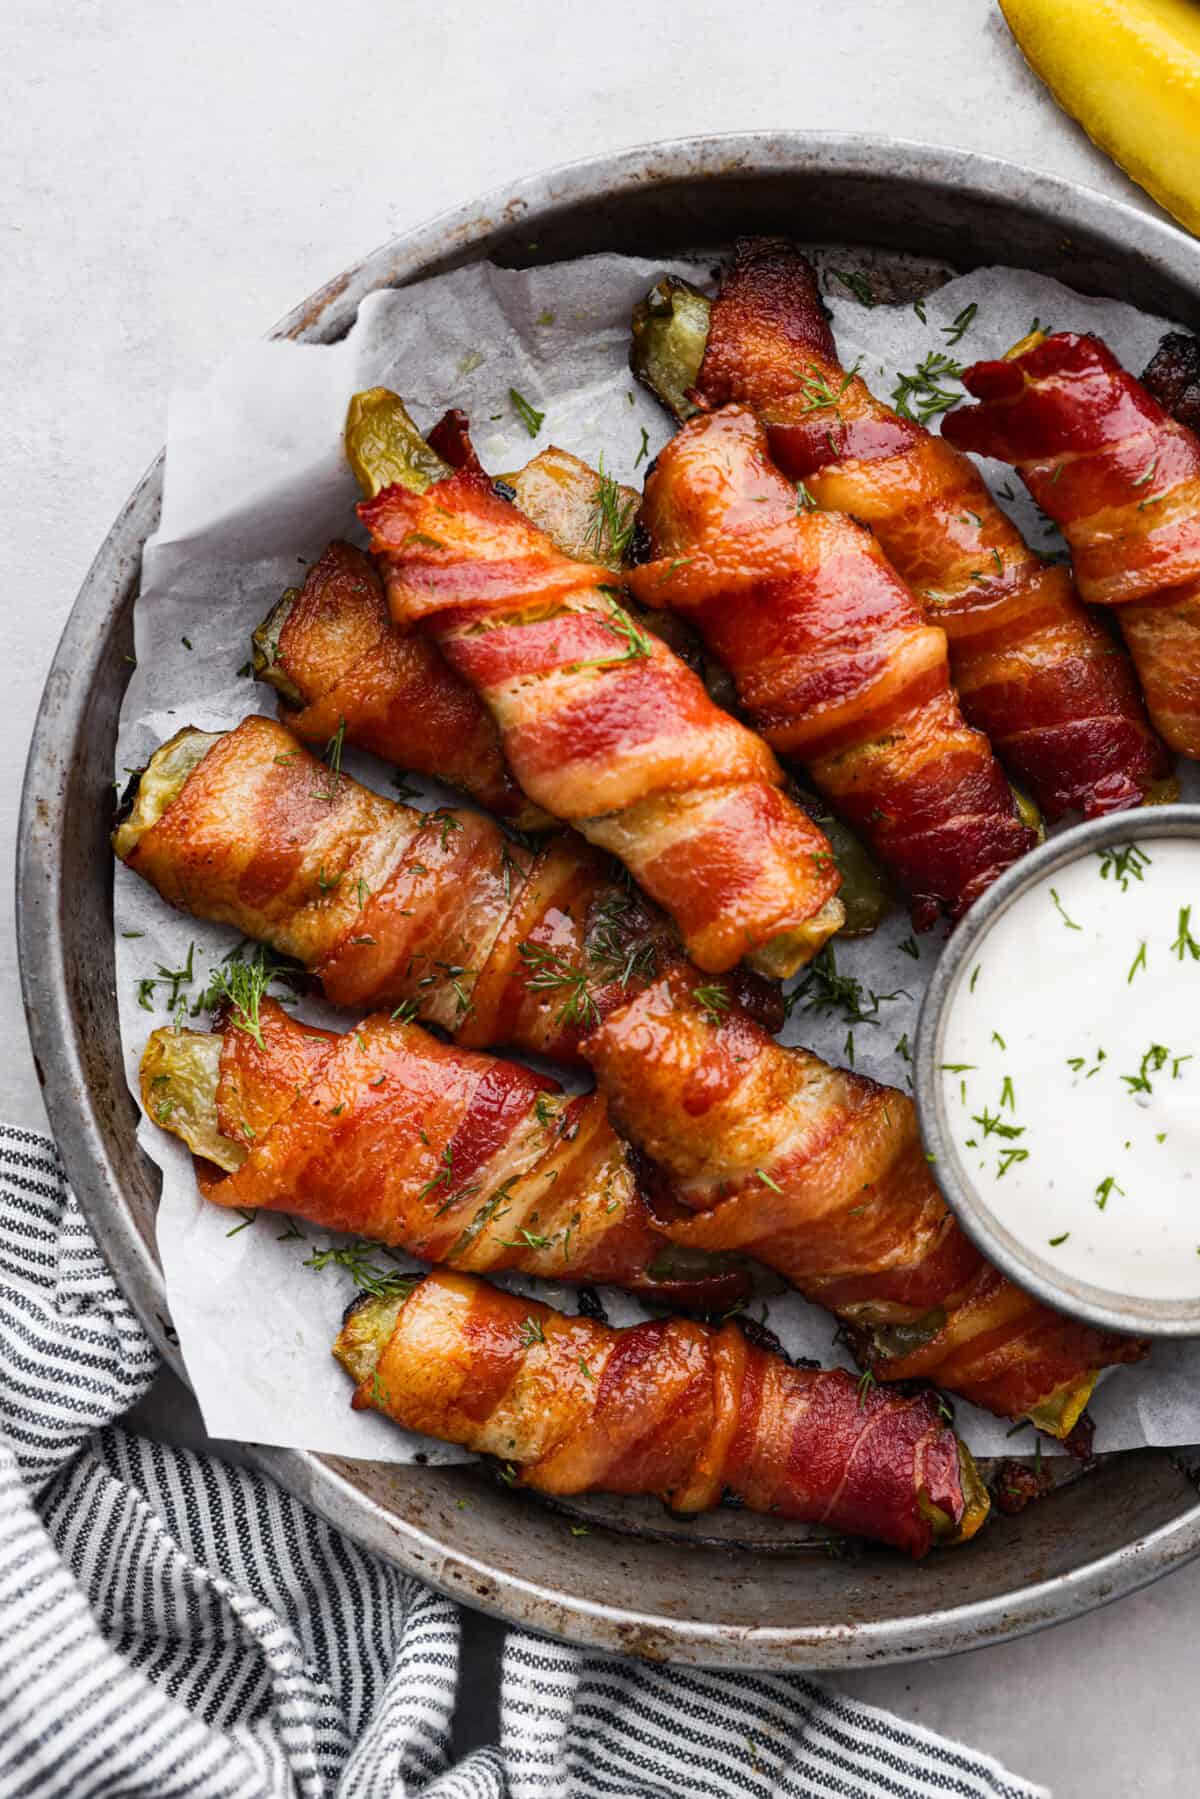 Bacon wrapped pickles in a gray serving bowl, served with a side of ranch dressing.